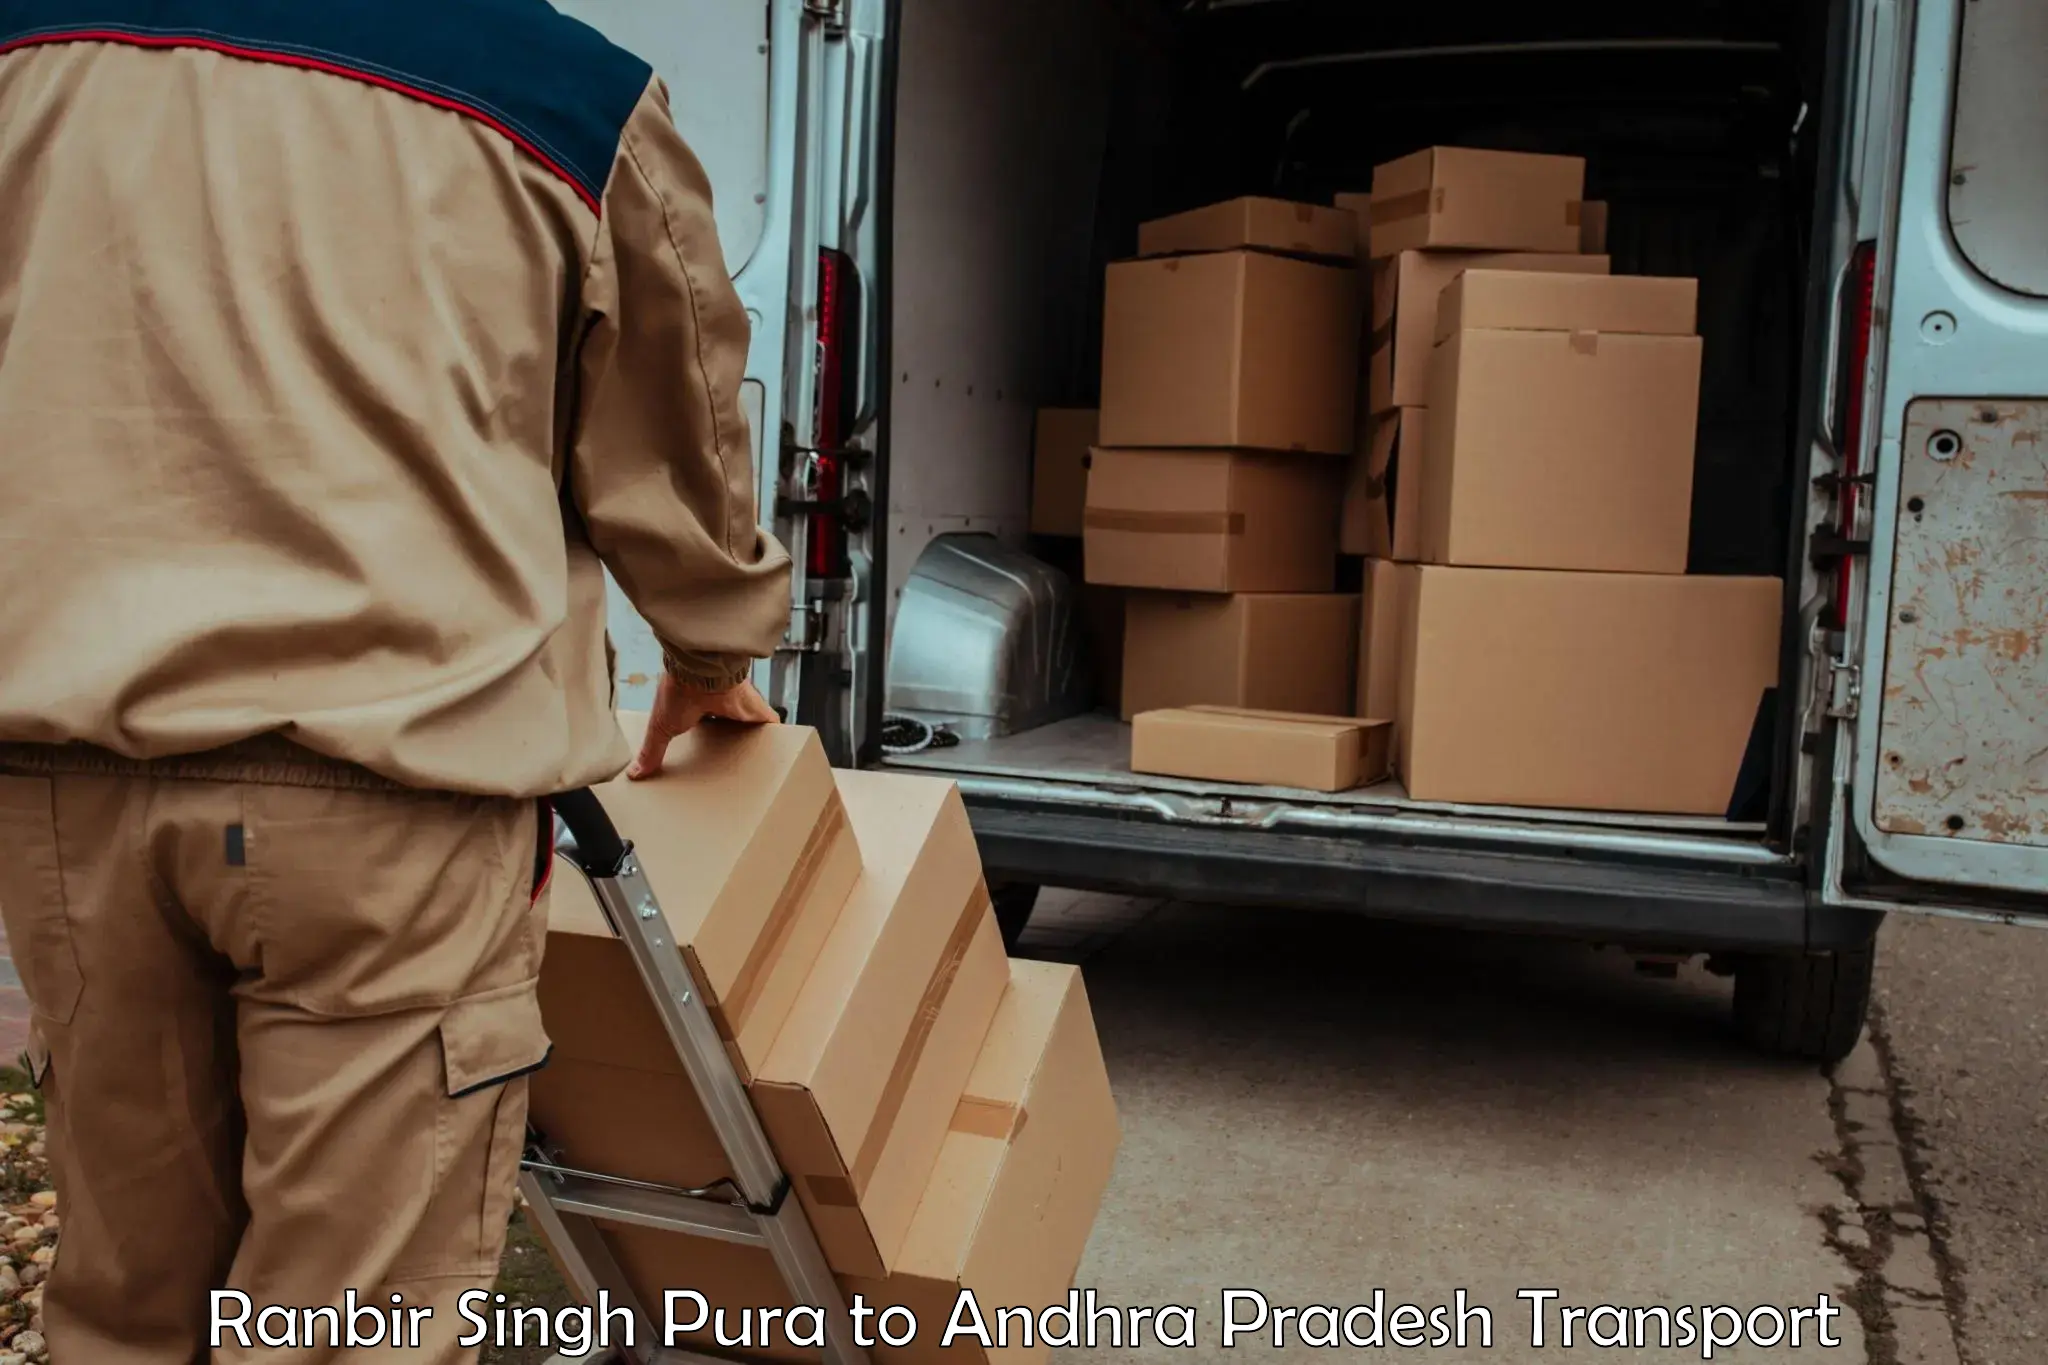 Delivery service Ranbir Singh Pura to Orvakal